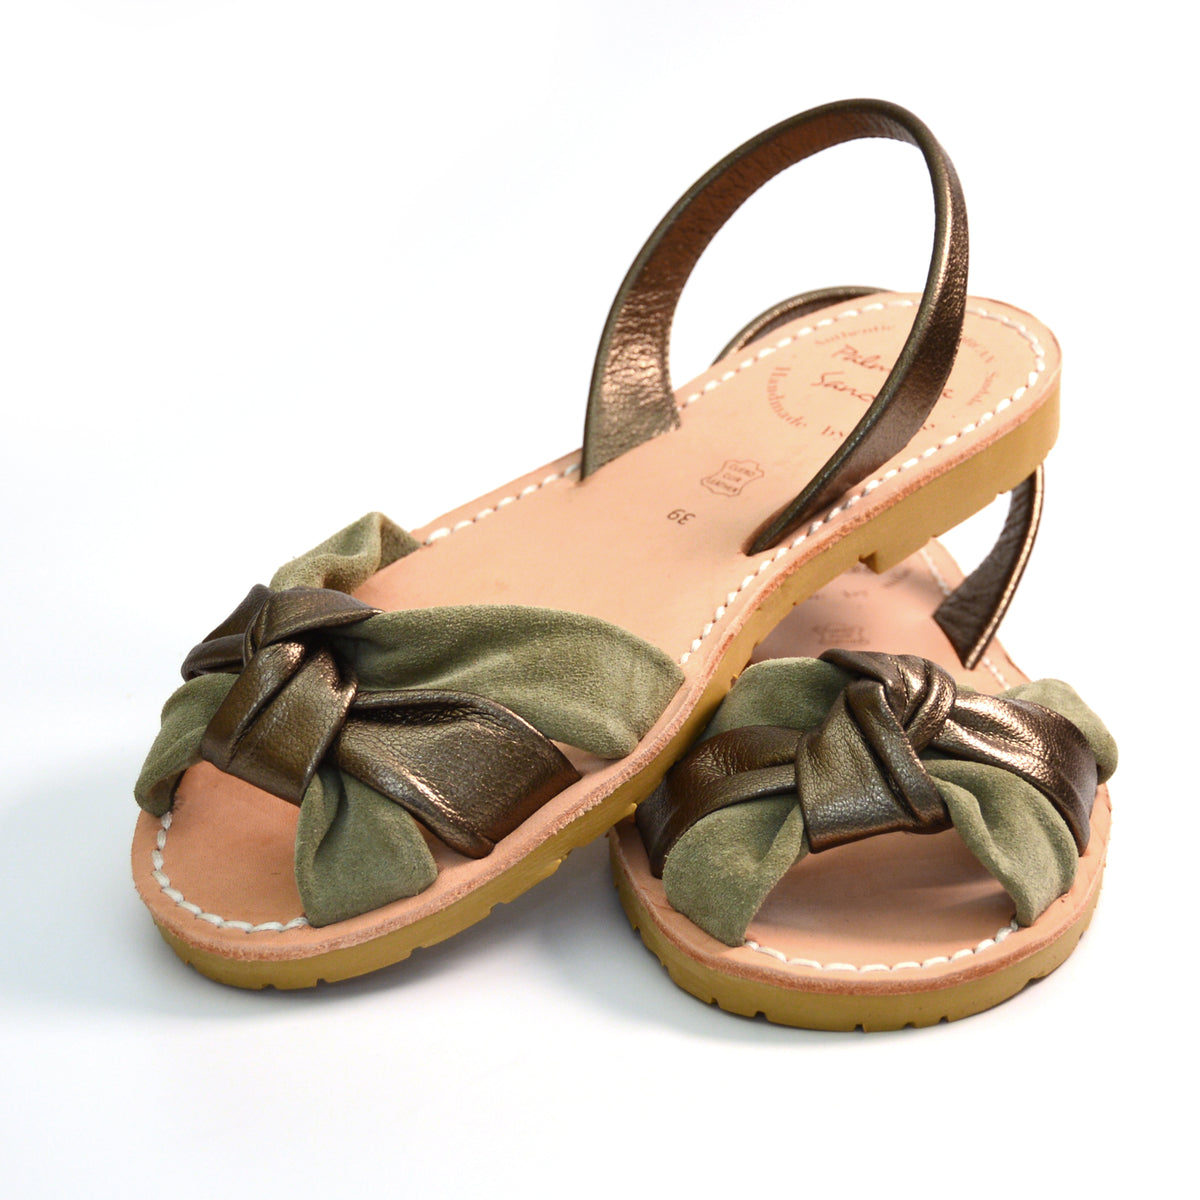 green suede and metallic pewter leather strappy knot detail peeptoe menorcan spanish avarcas sandals